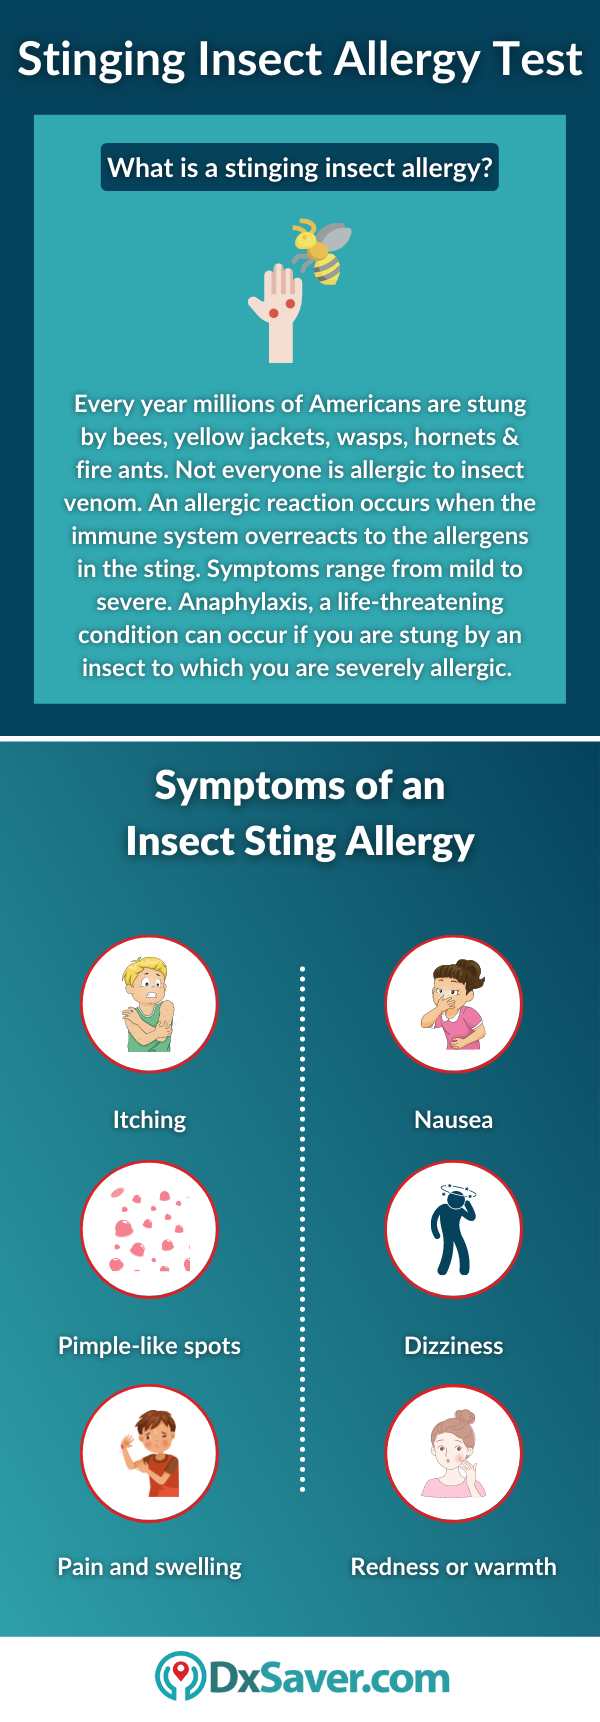 Stinging Insect Allergy and its Symptoms